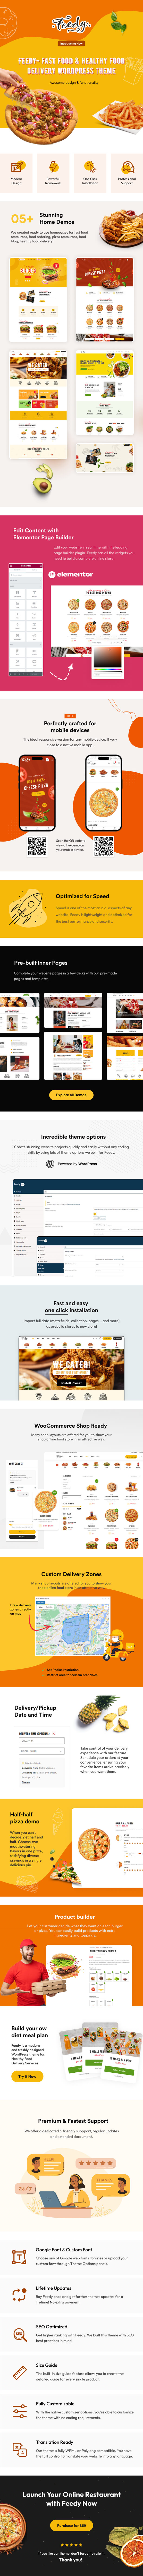 Feedy - Healthy Fast Food Delivery & Diet Nutrition WordPress Theme - 1